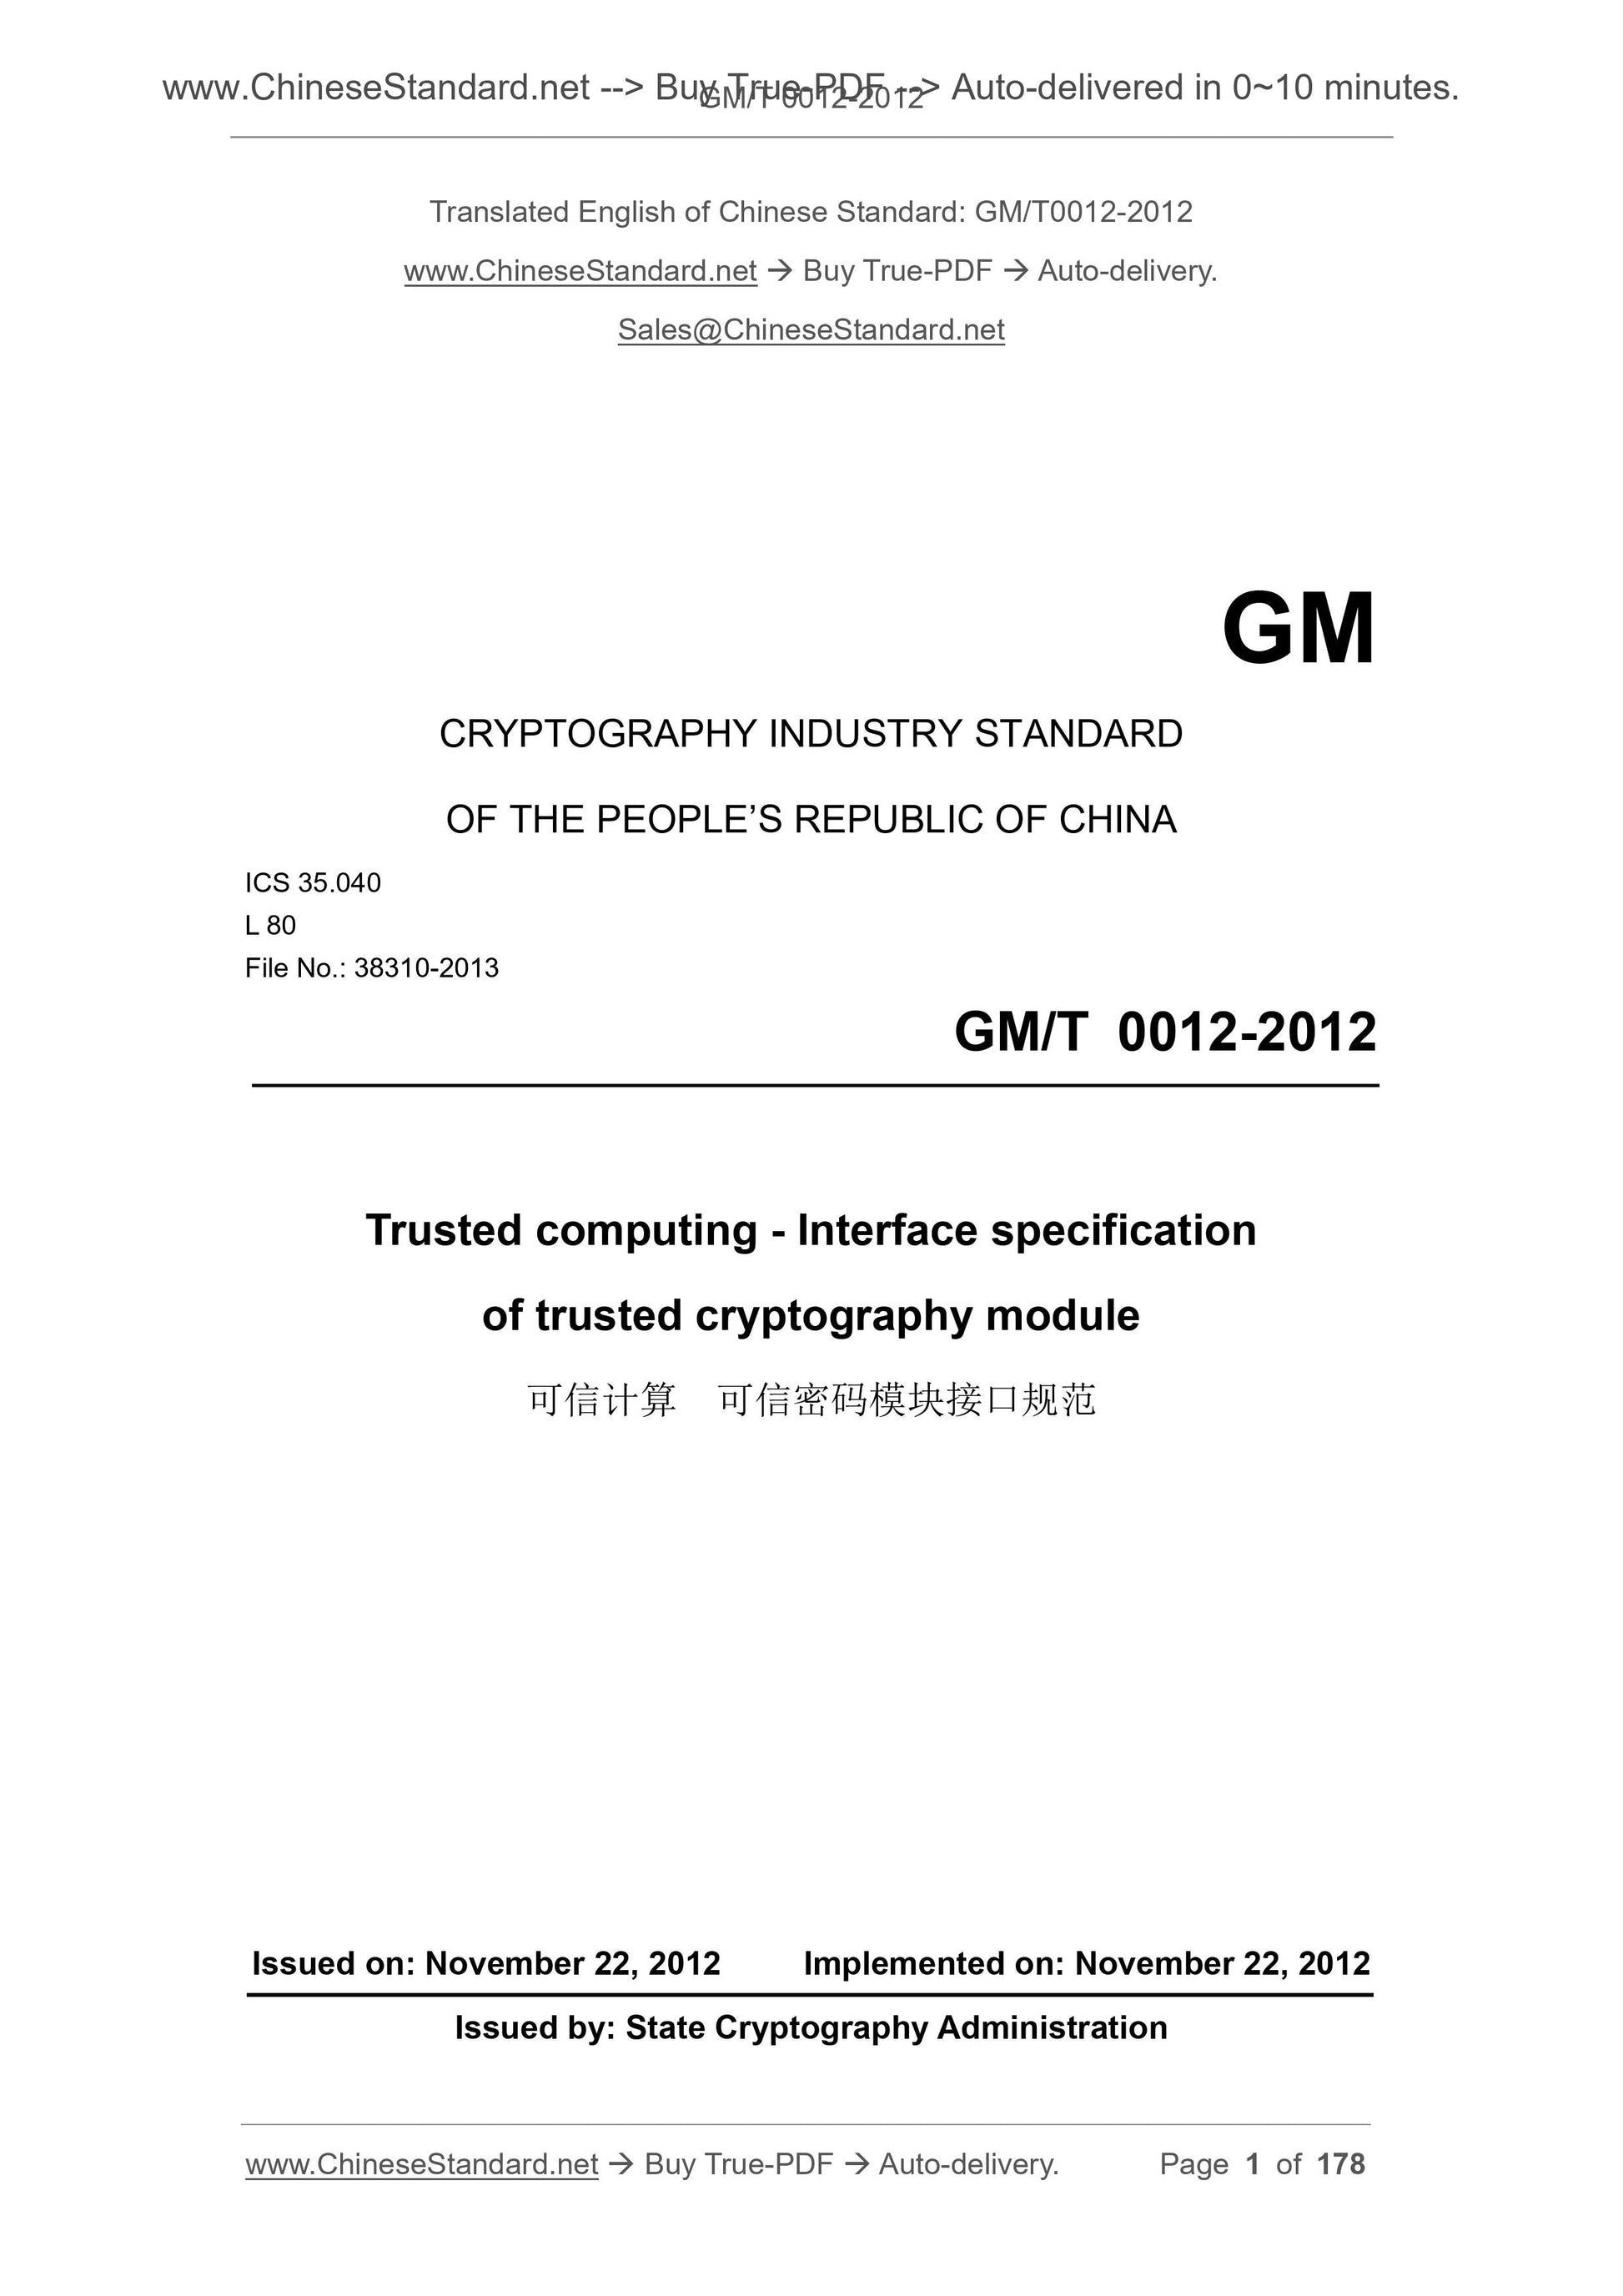 GM/T 0012-2012 Page 1